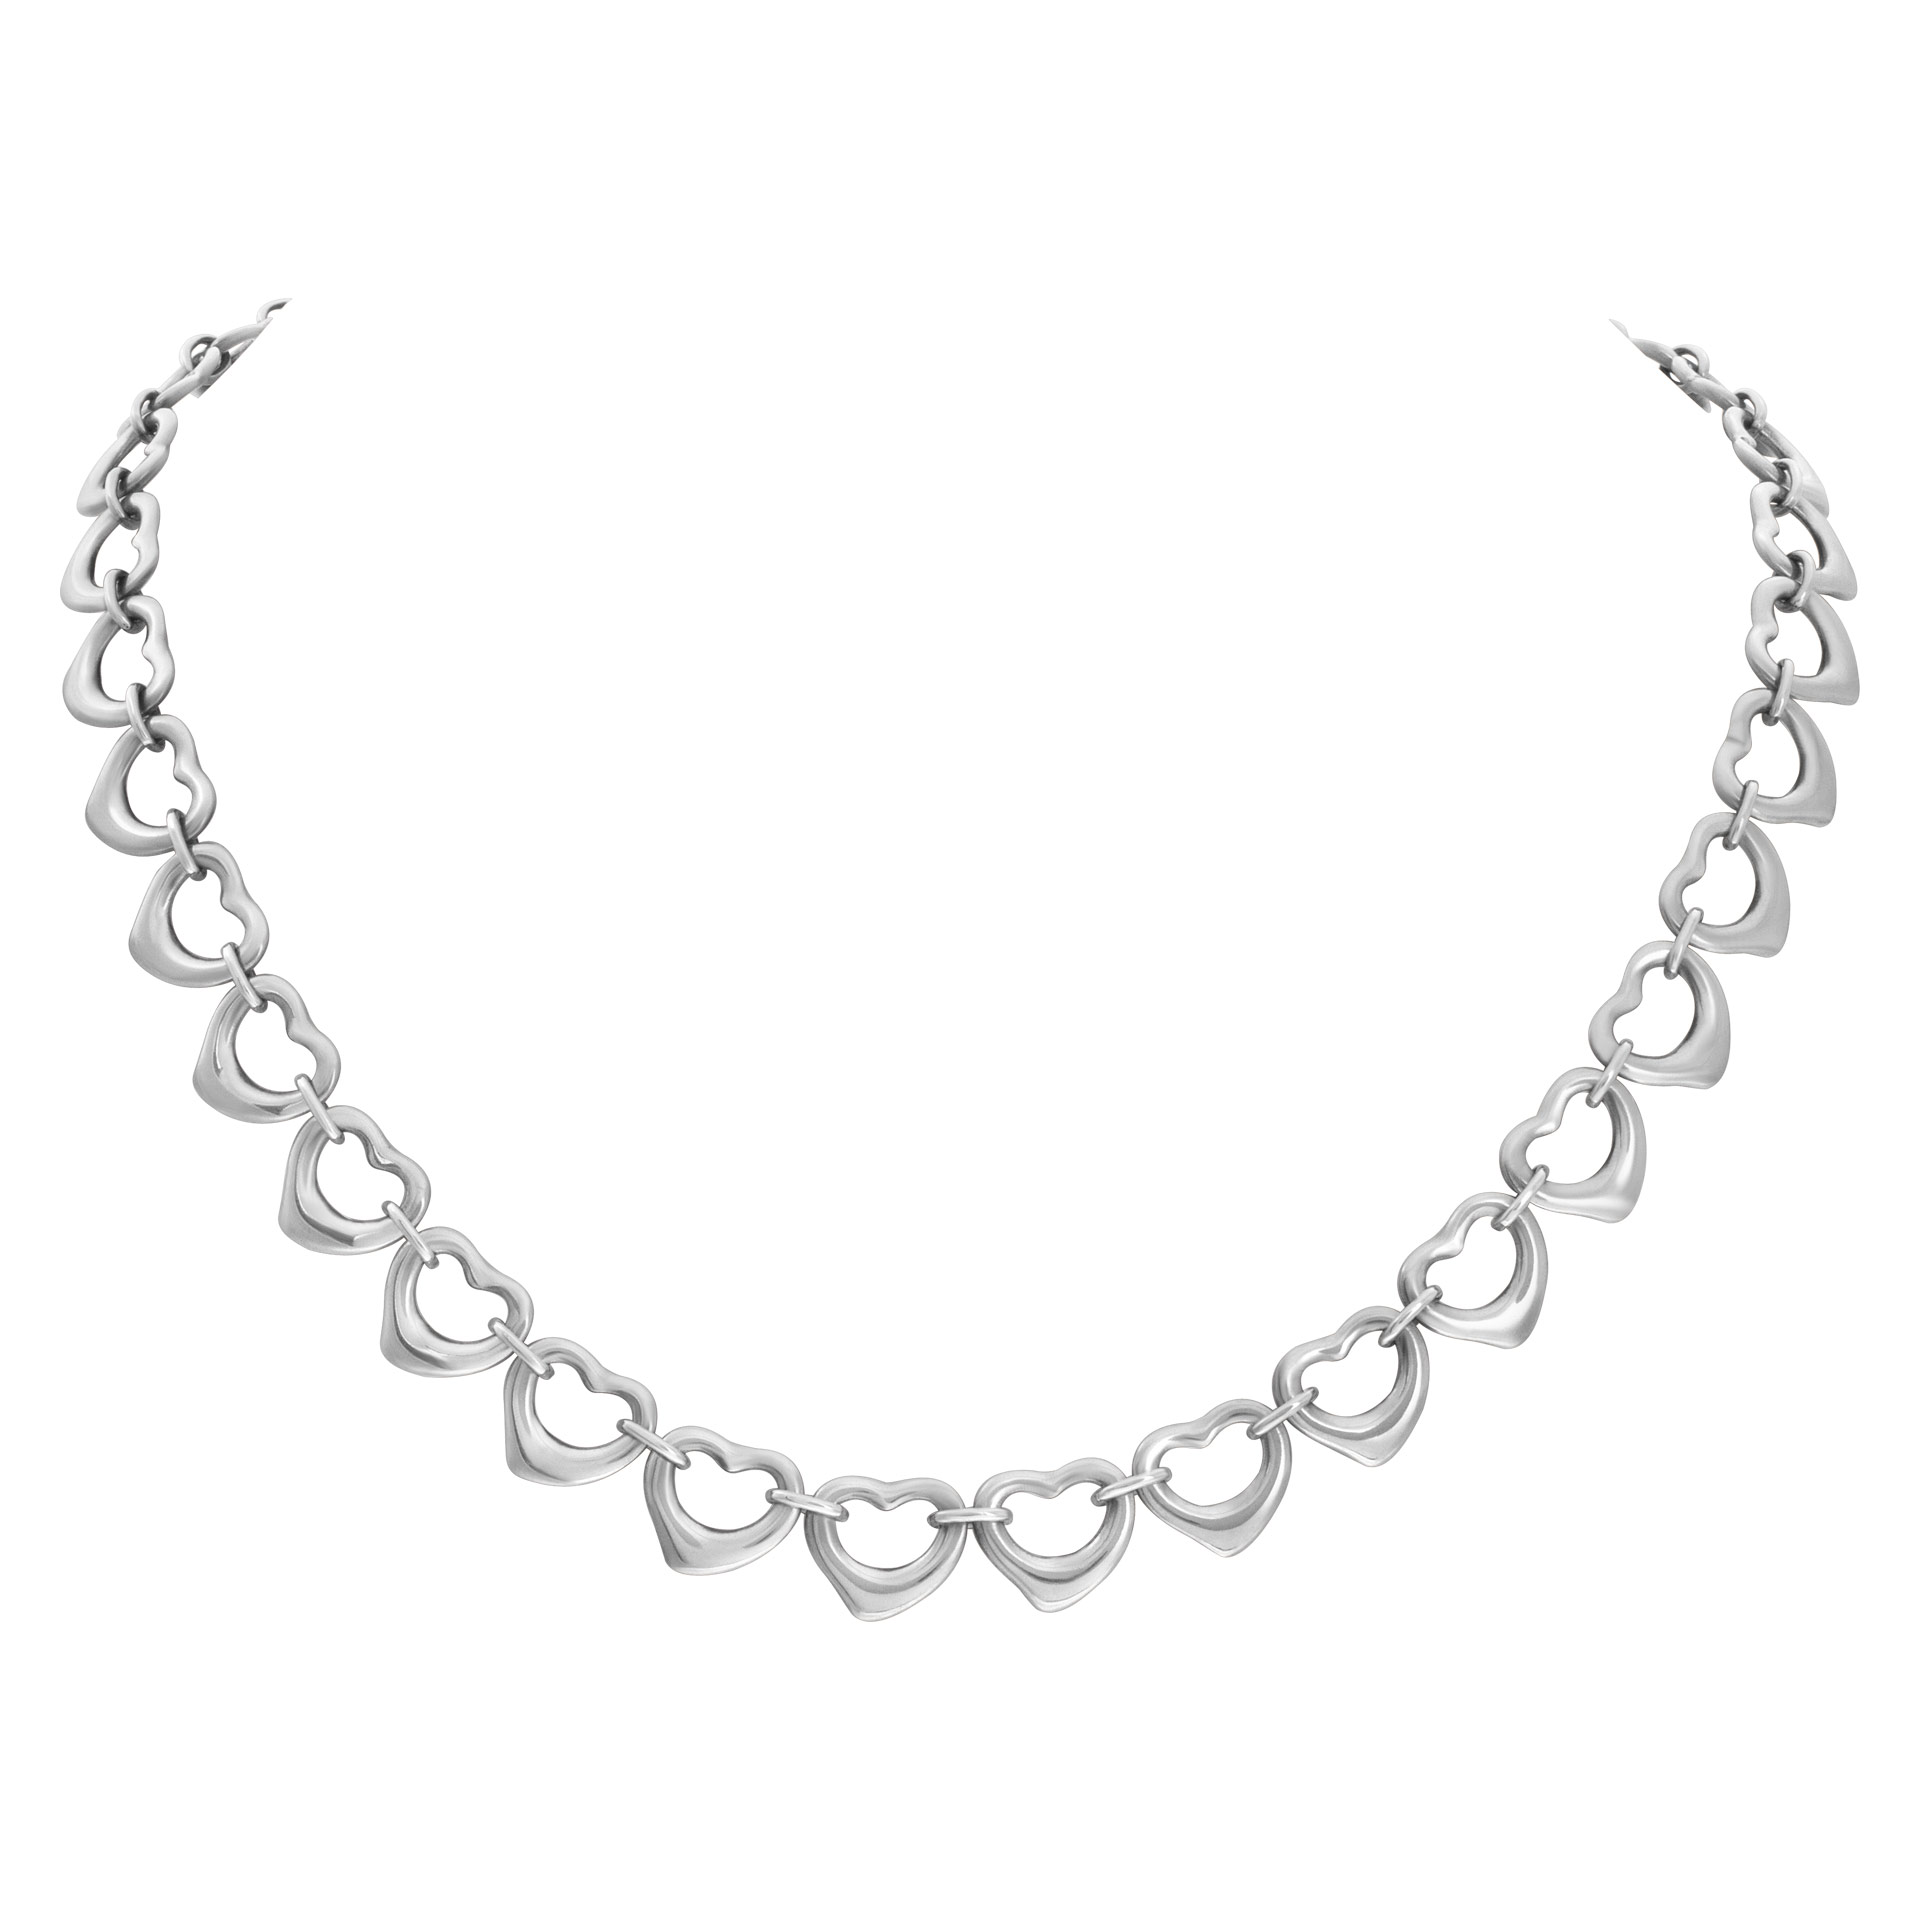 Tiffany & Co. heart style necklace in sterling silver